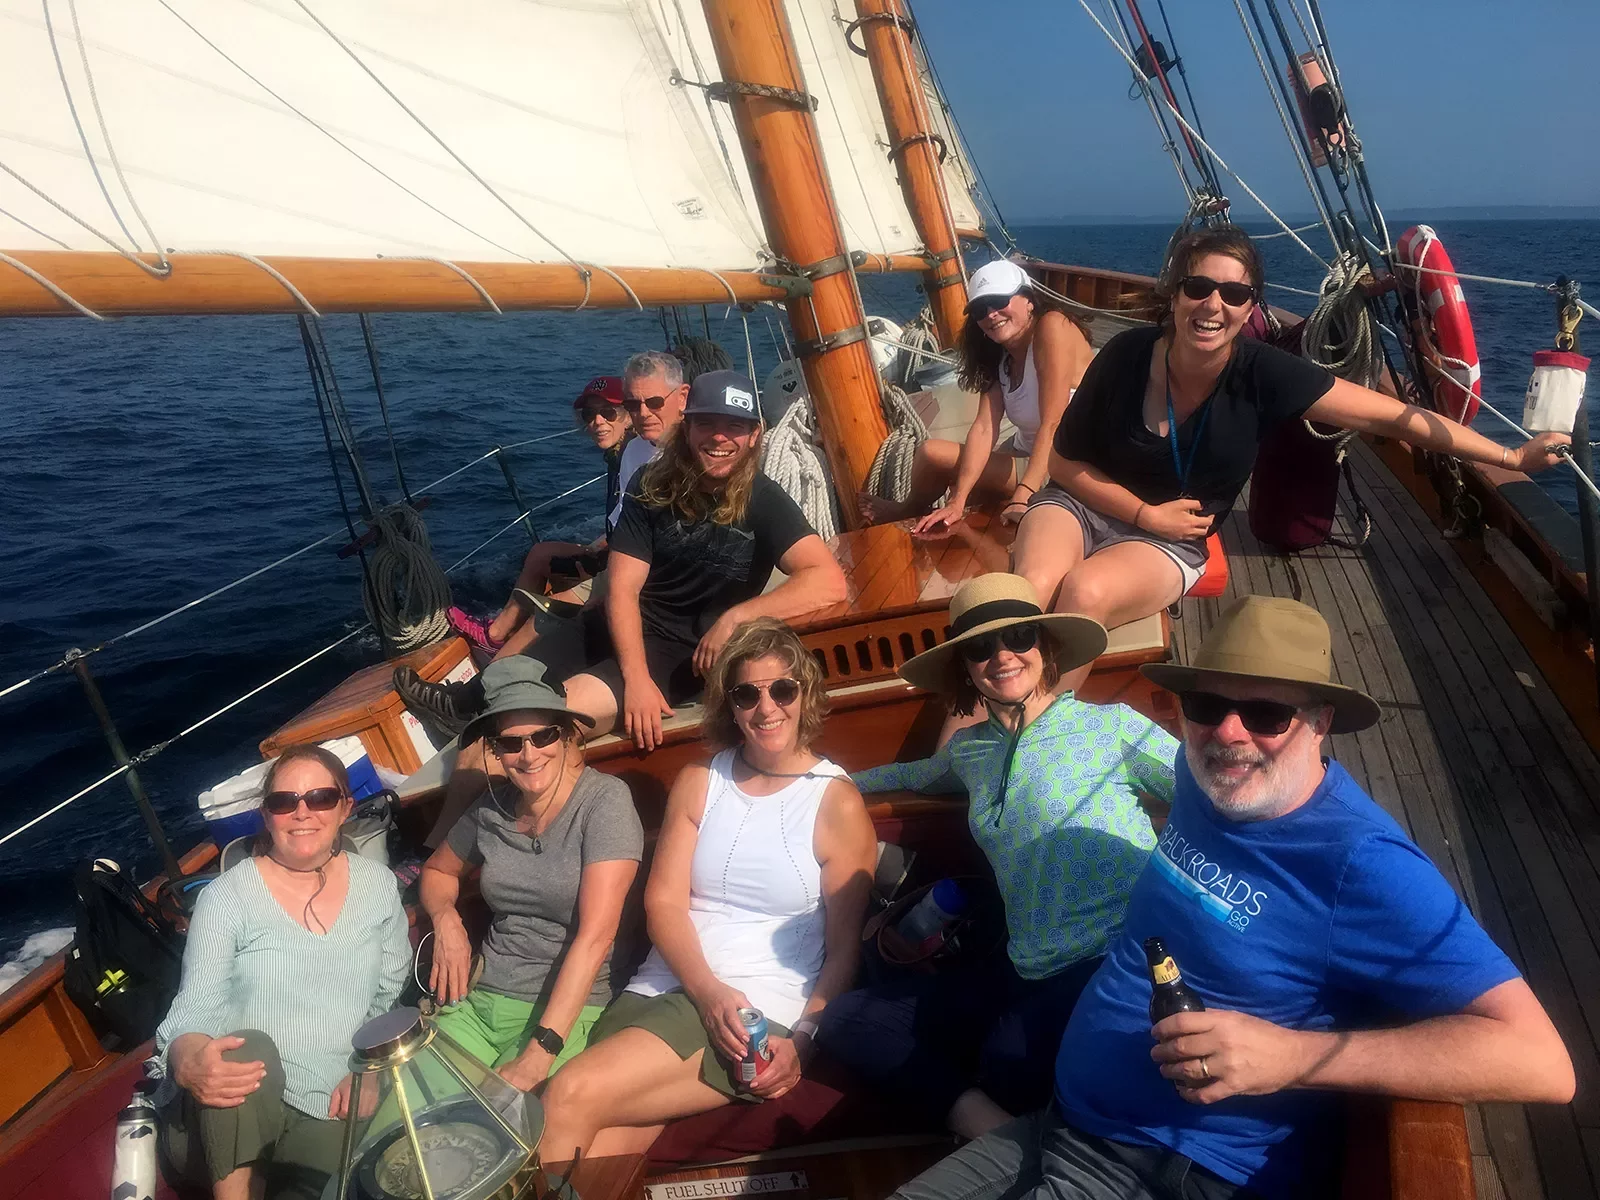 Group of guests on tilting sailboat, all facing camera.